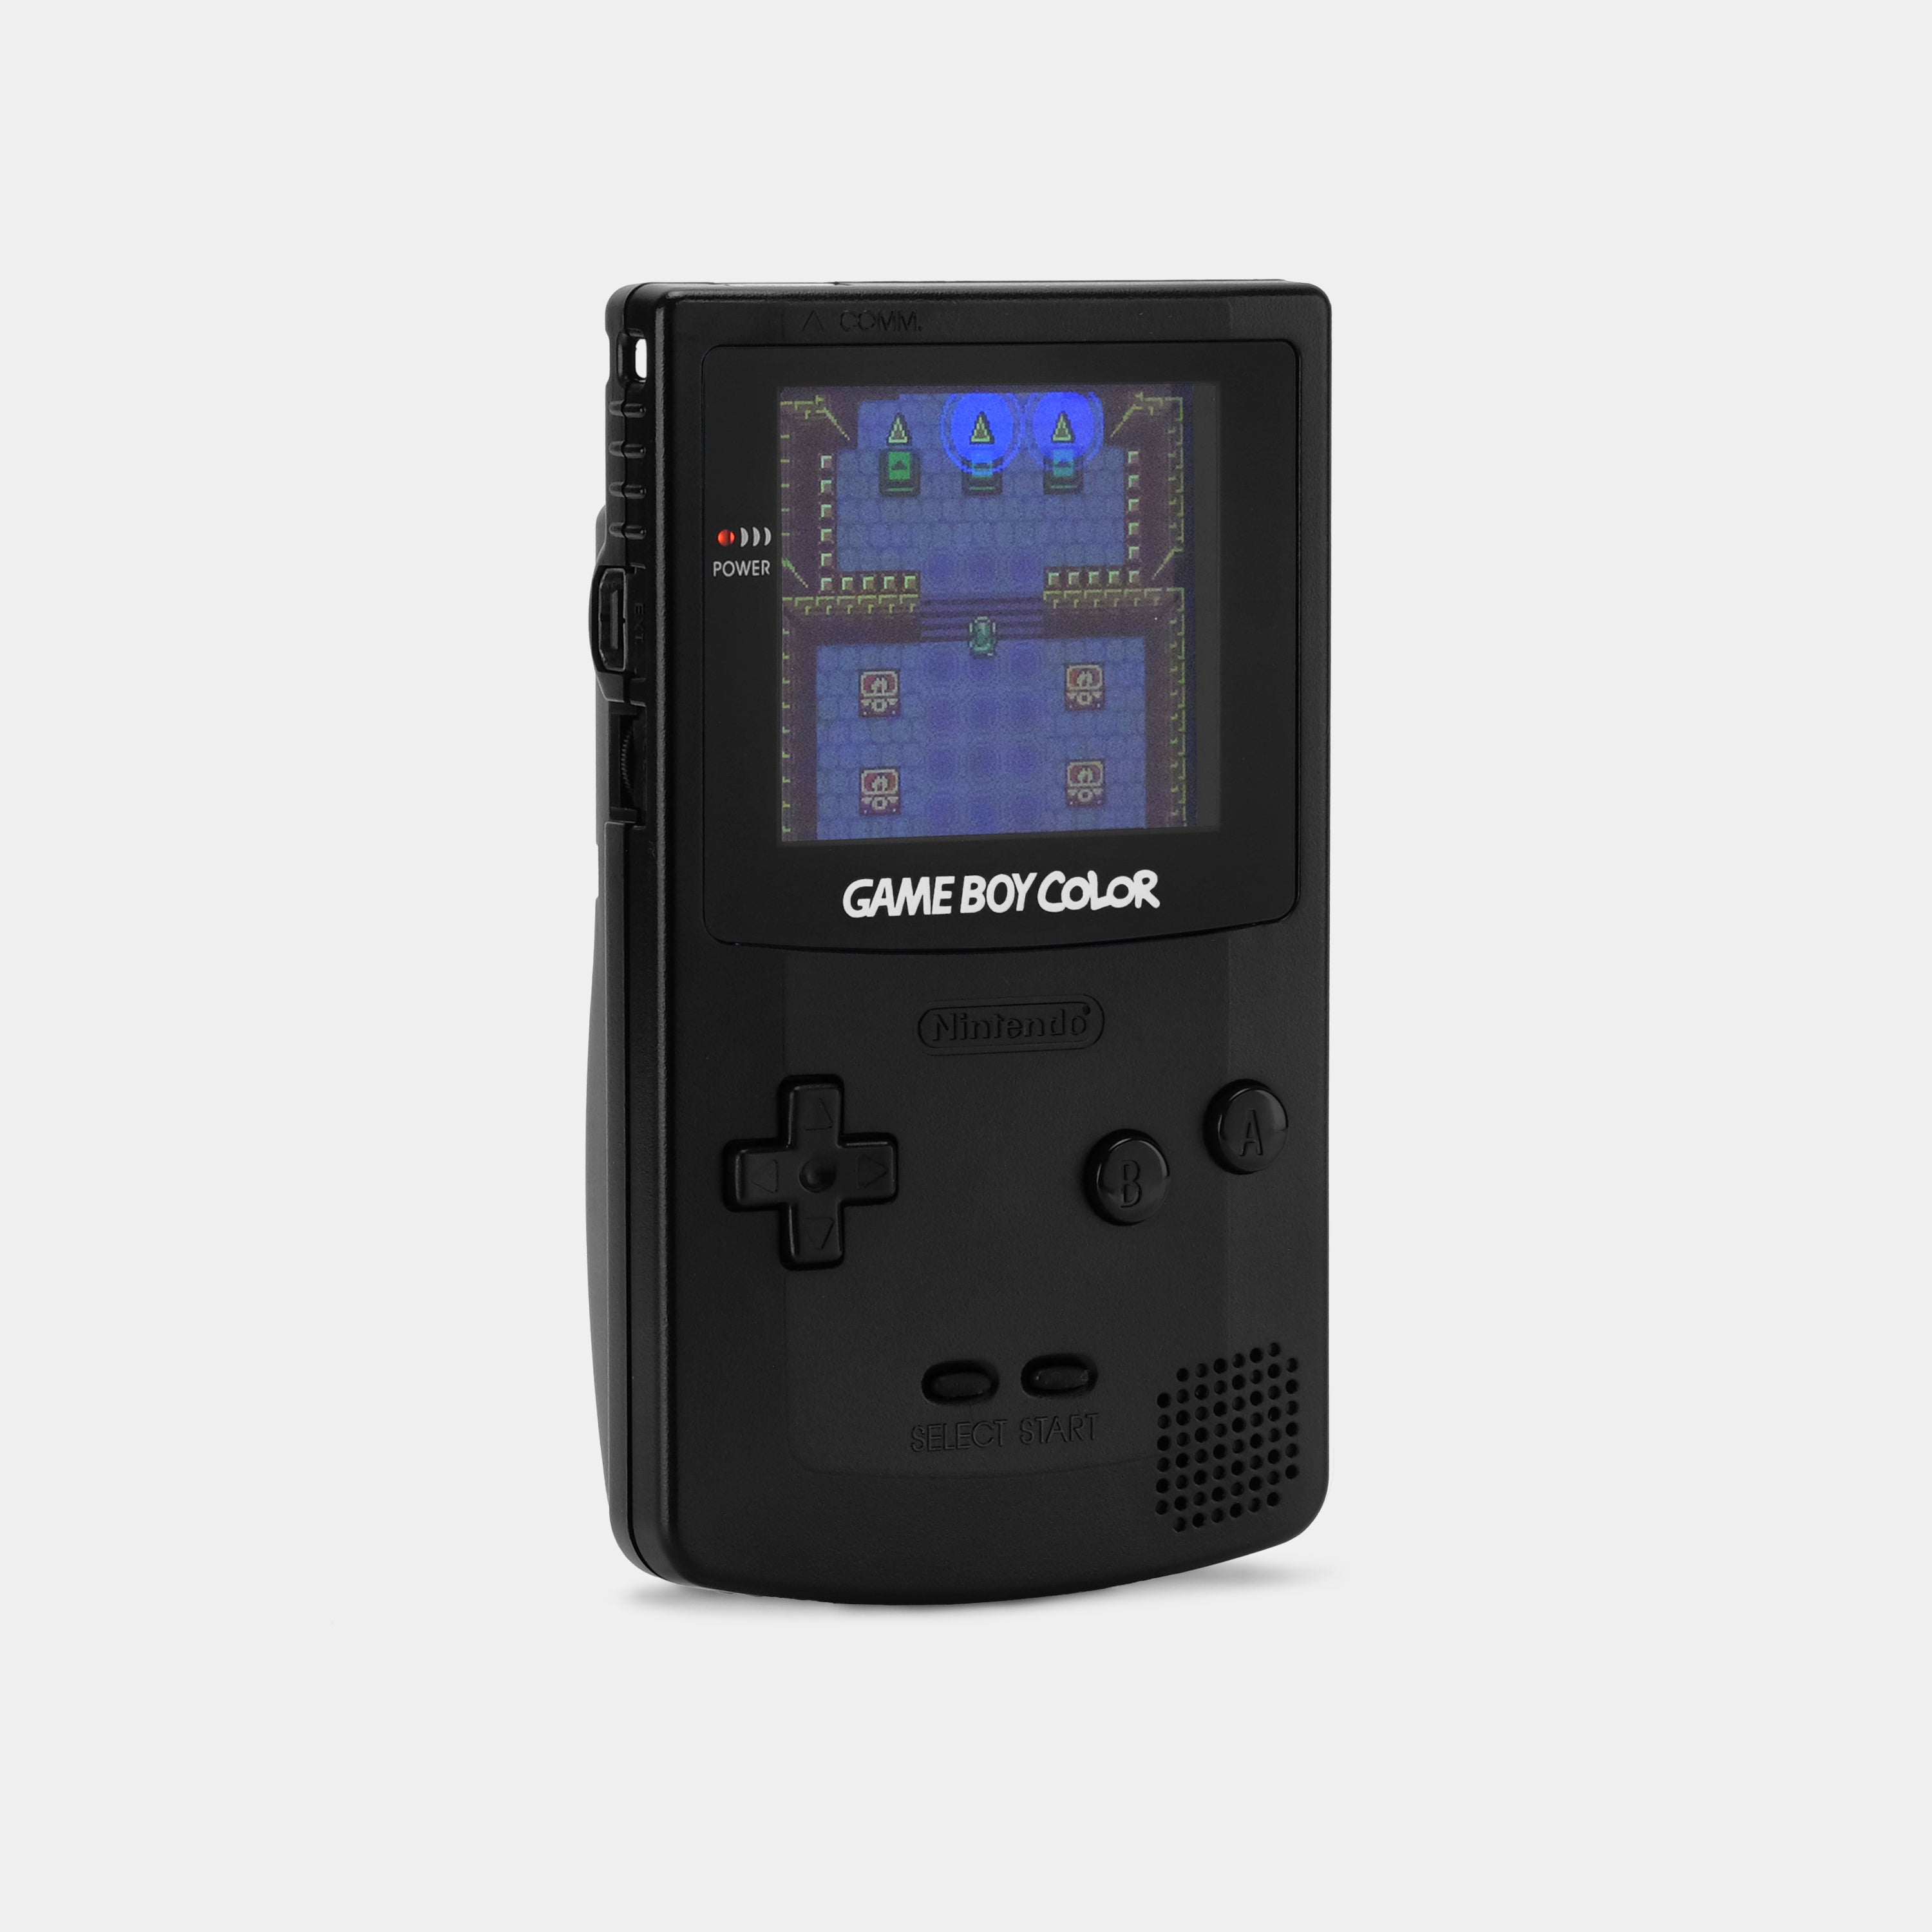 Nintendo Game Boy Color Black Game Console With Backlit Screen